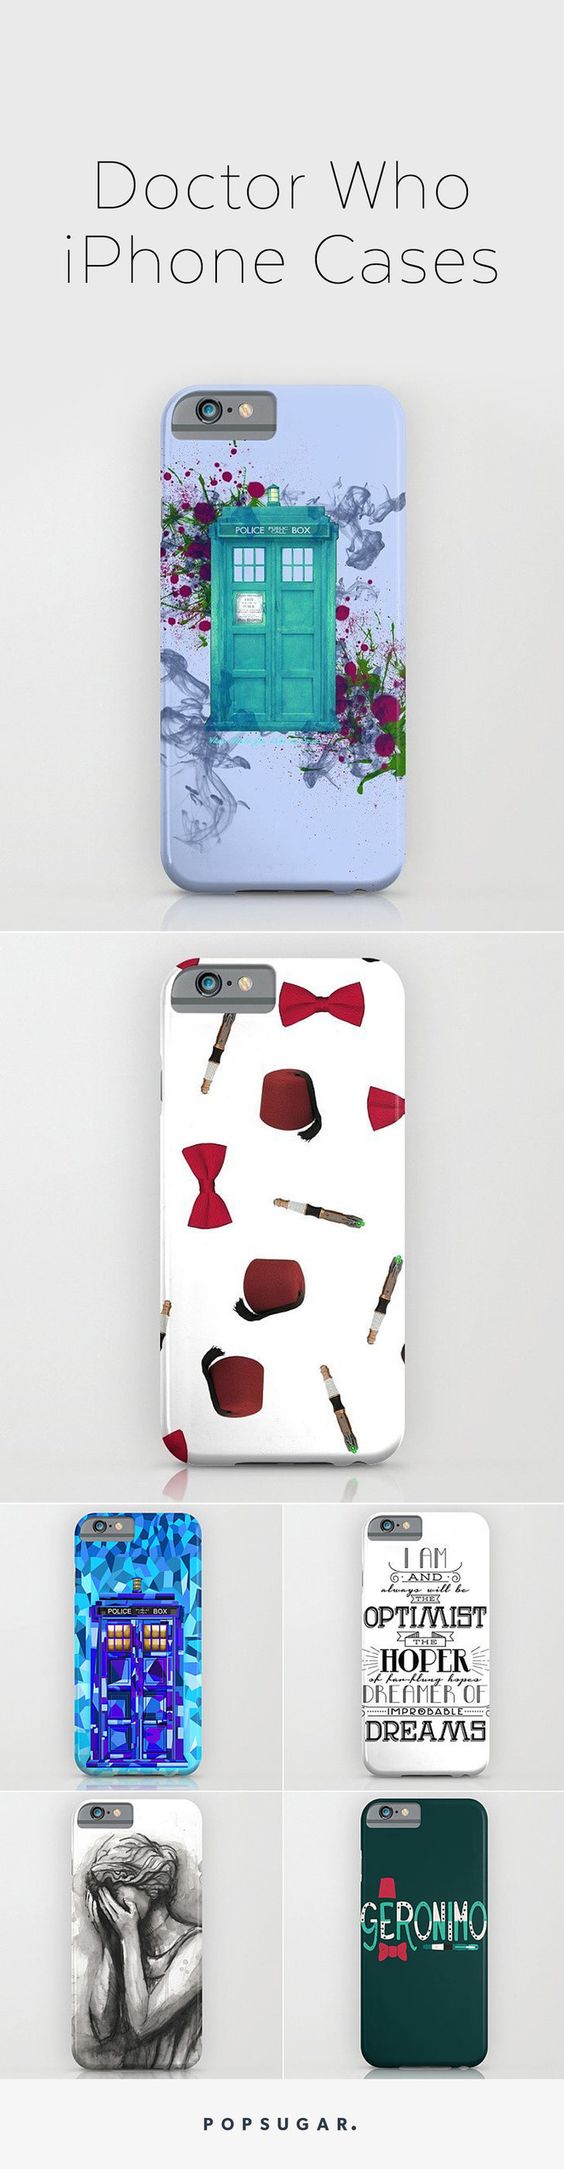 iPhone cases for serious Doctor Who fans.